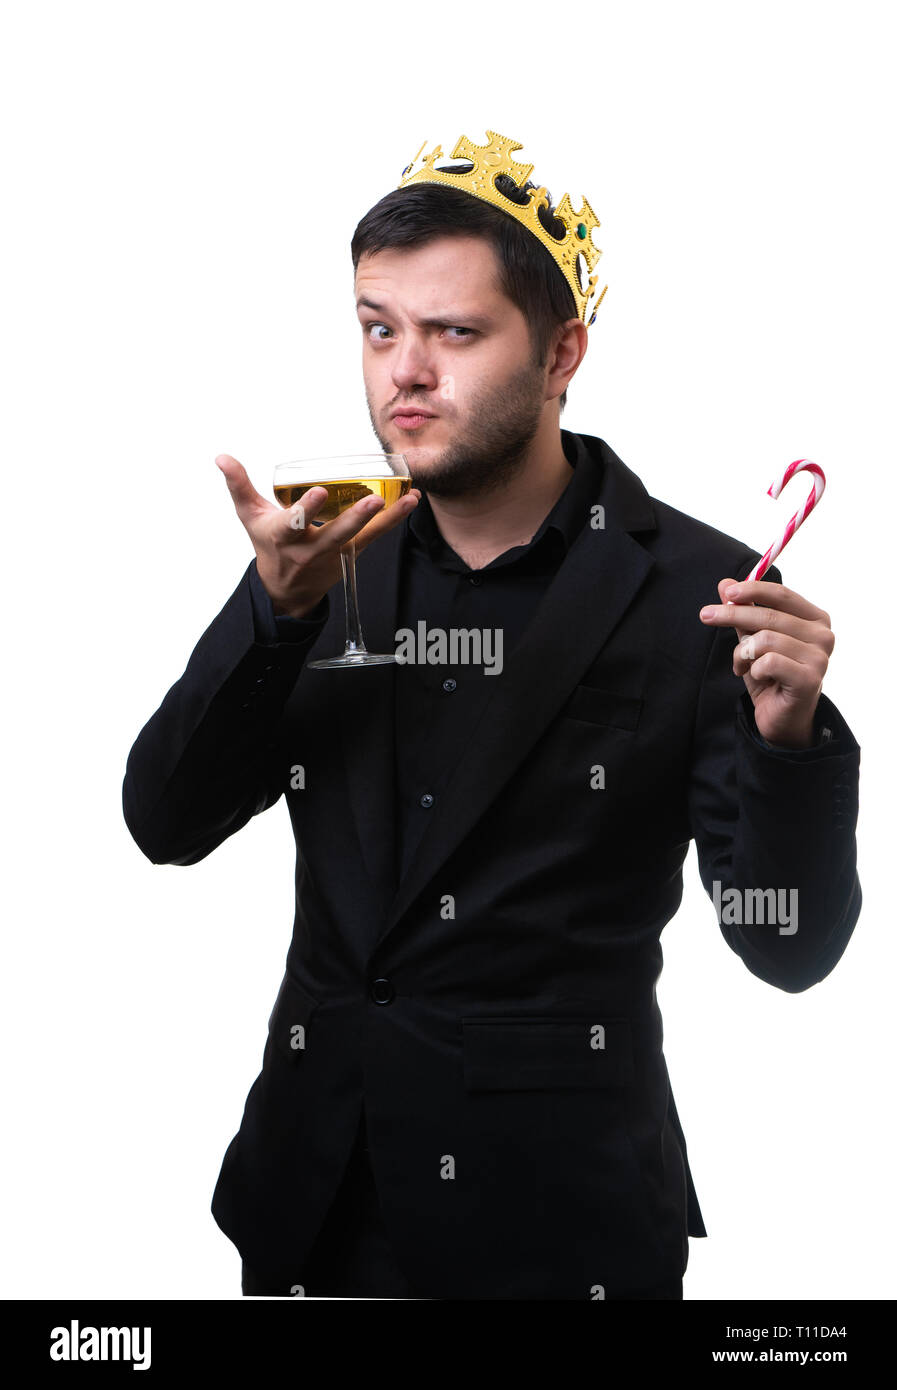 Serious man in crown, black suit with wine glass. Stock Photo